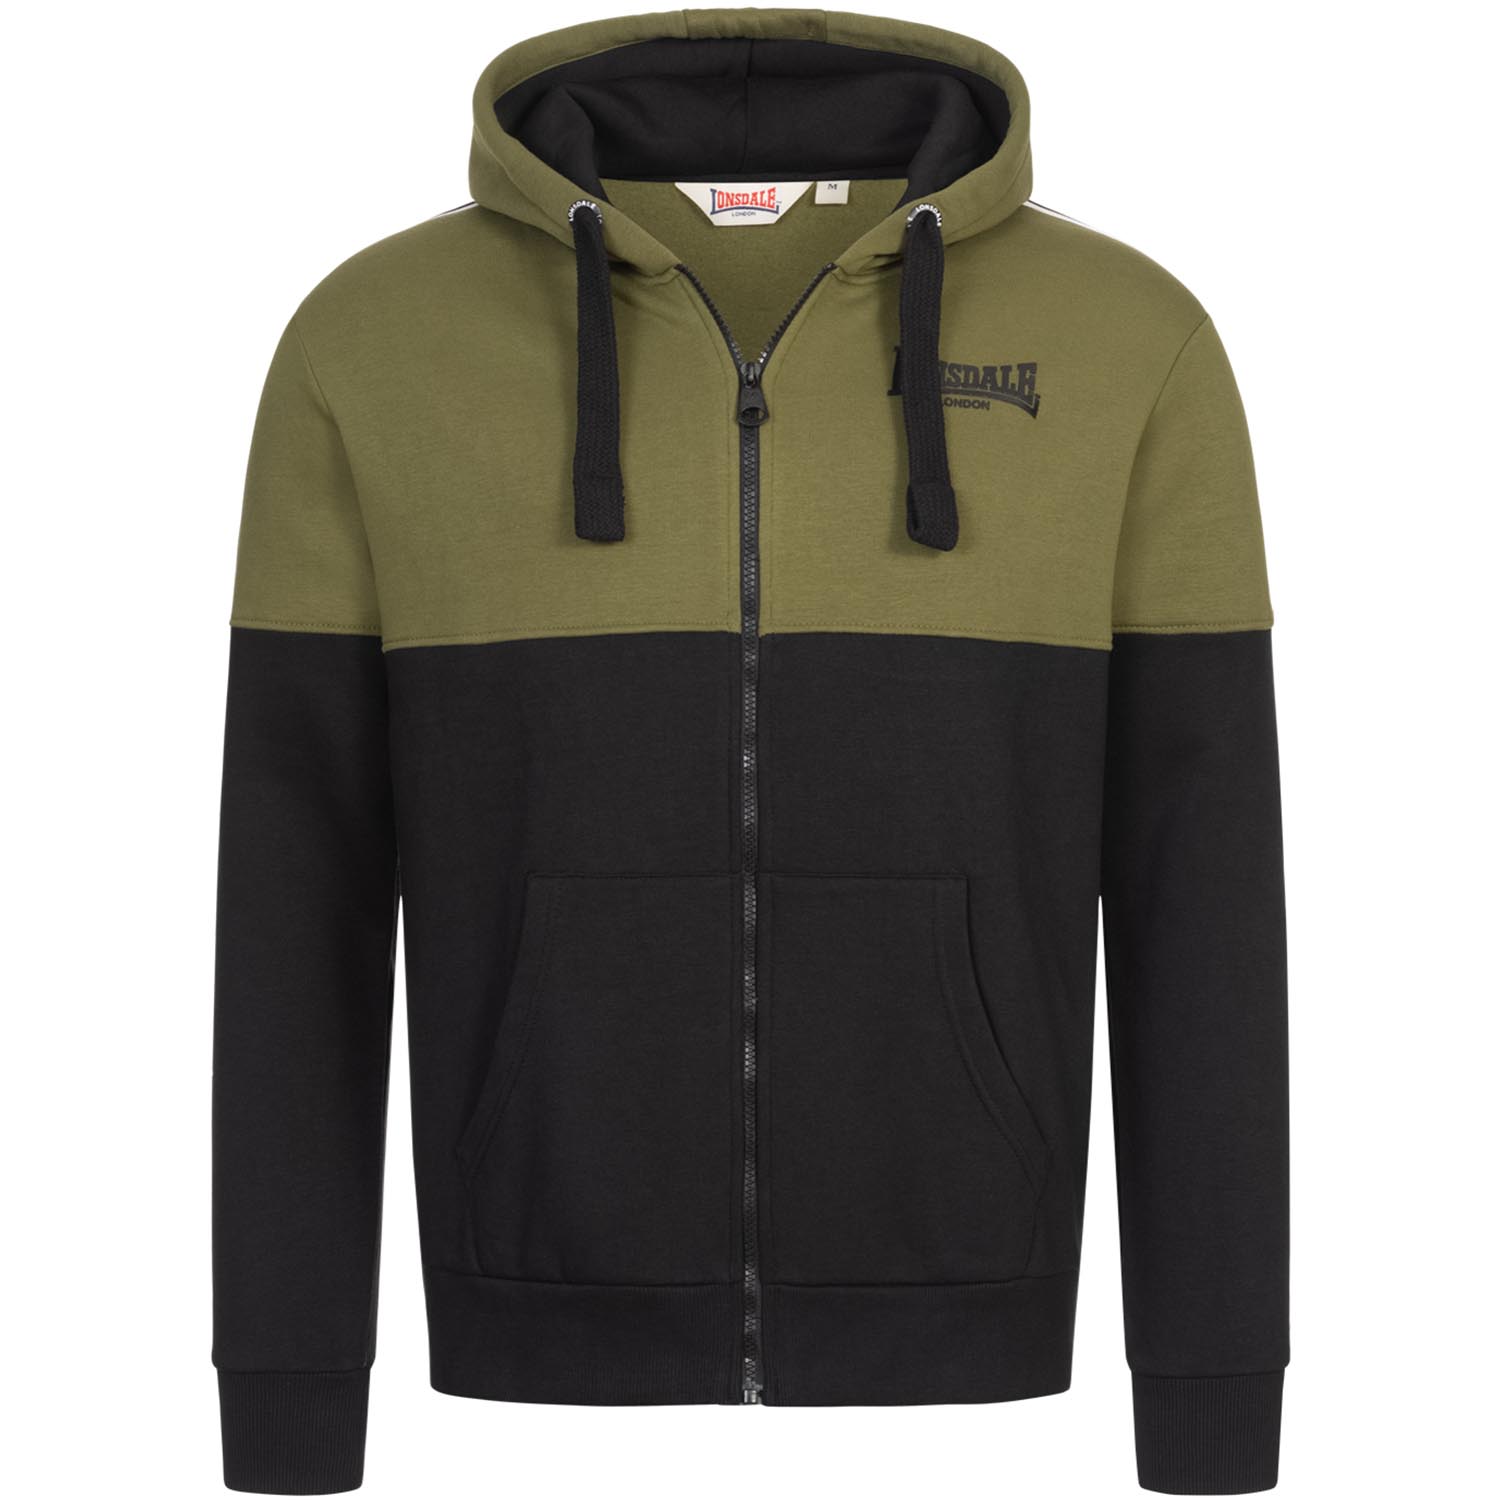 Lonsdale Hoody, Lucklawhill, olive